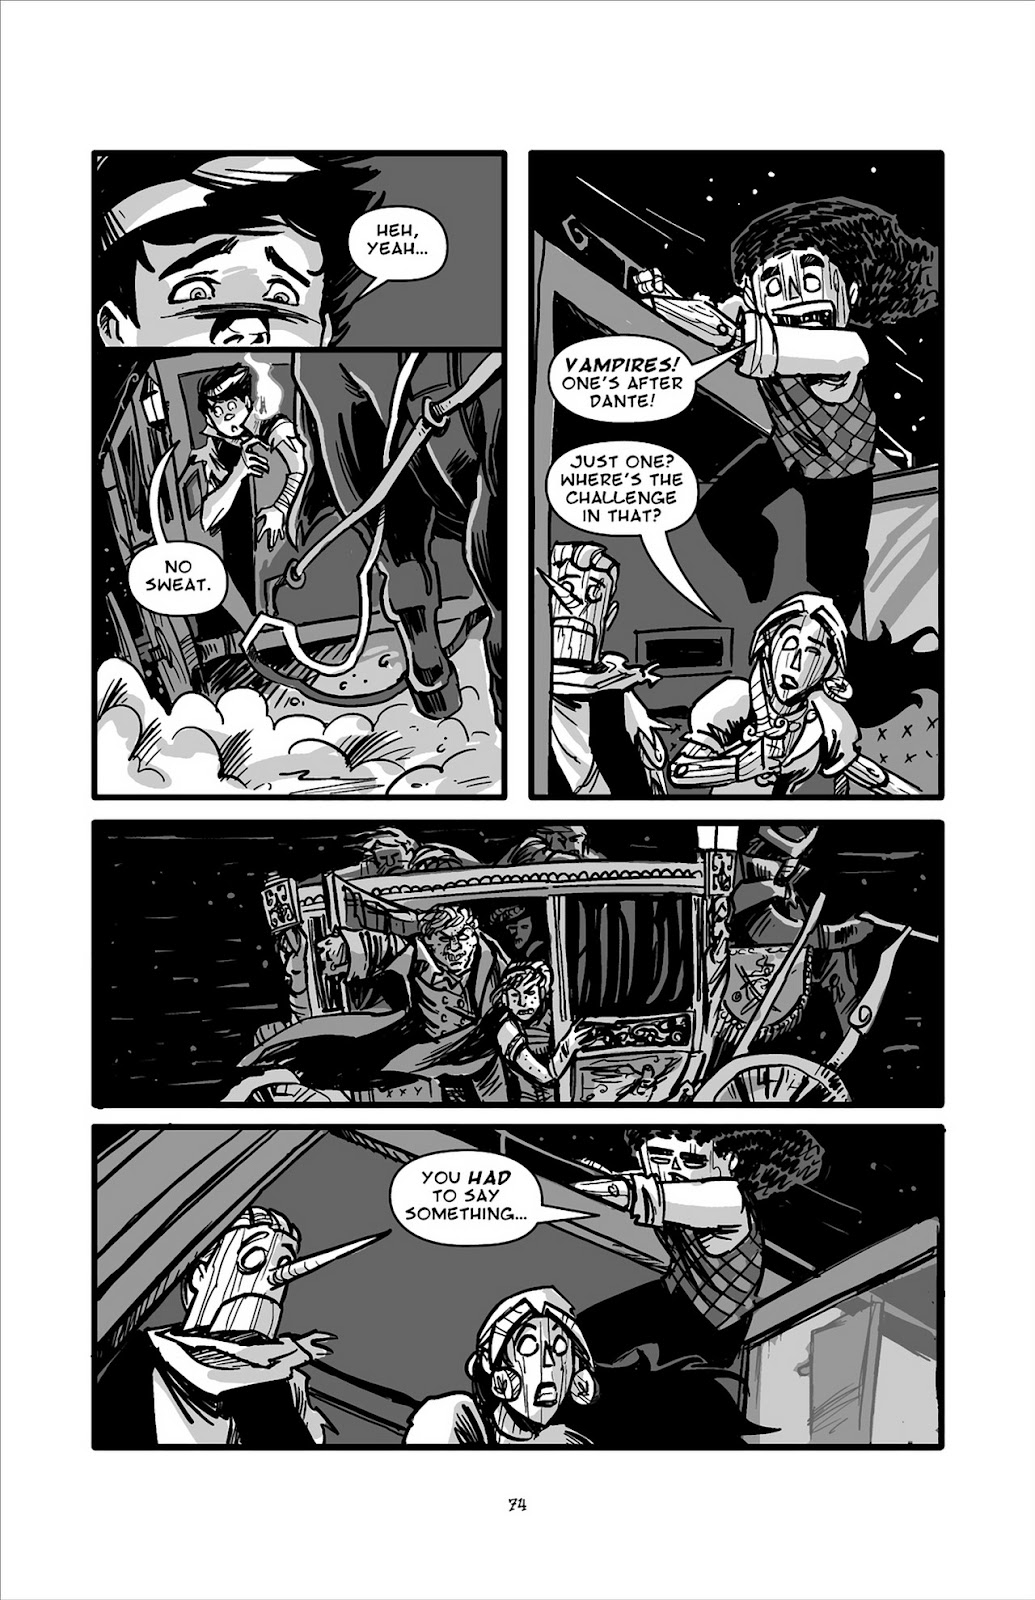 Pinocchio: Vampire Slayer - Of Wood and Blood issue 3 - Page 25